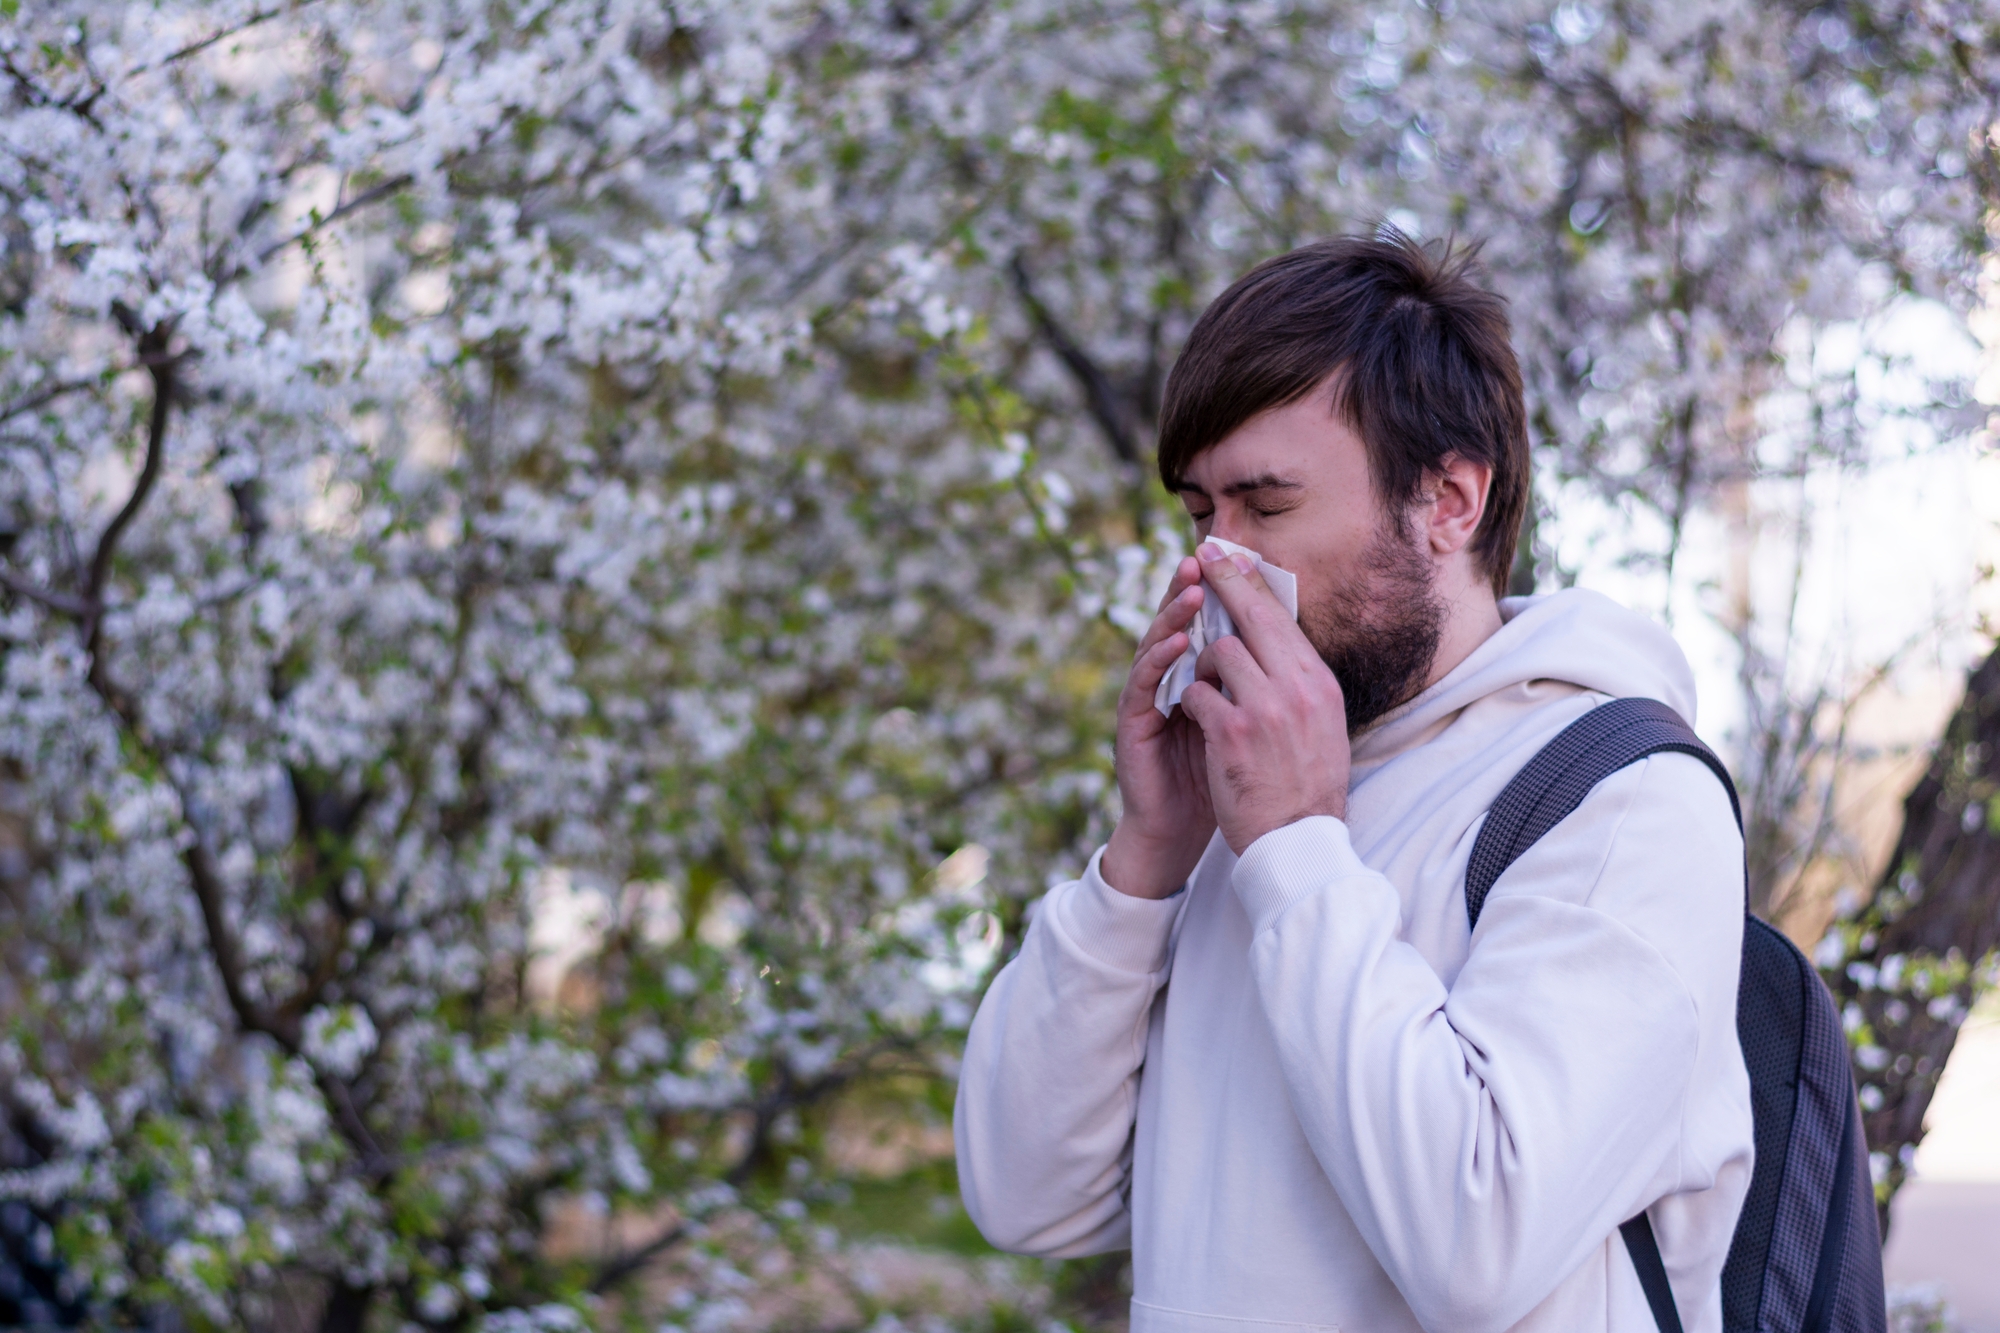 A man sneezing in front of a blossoming cherry tree